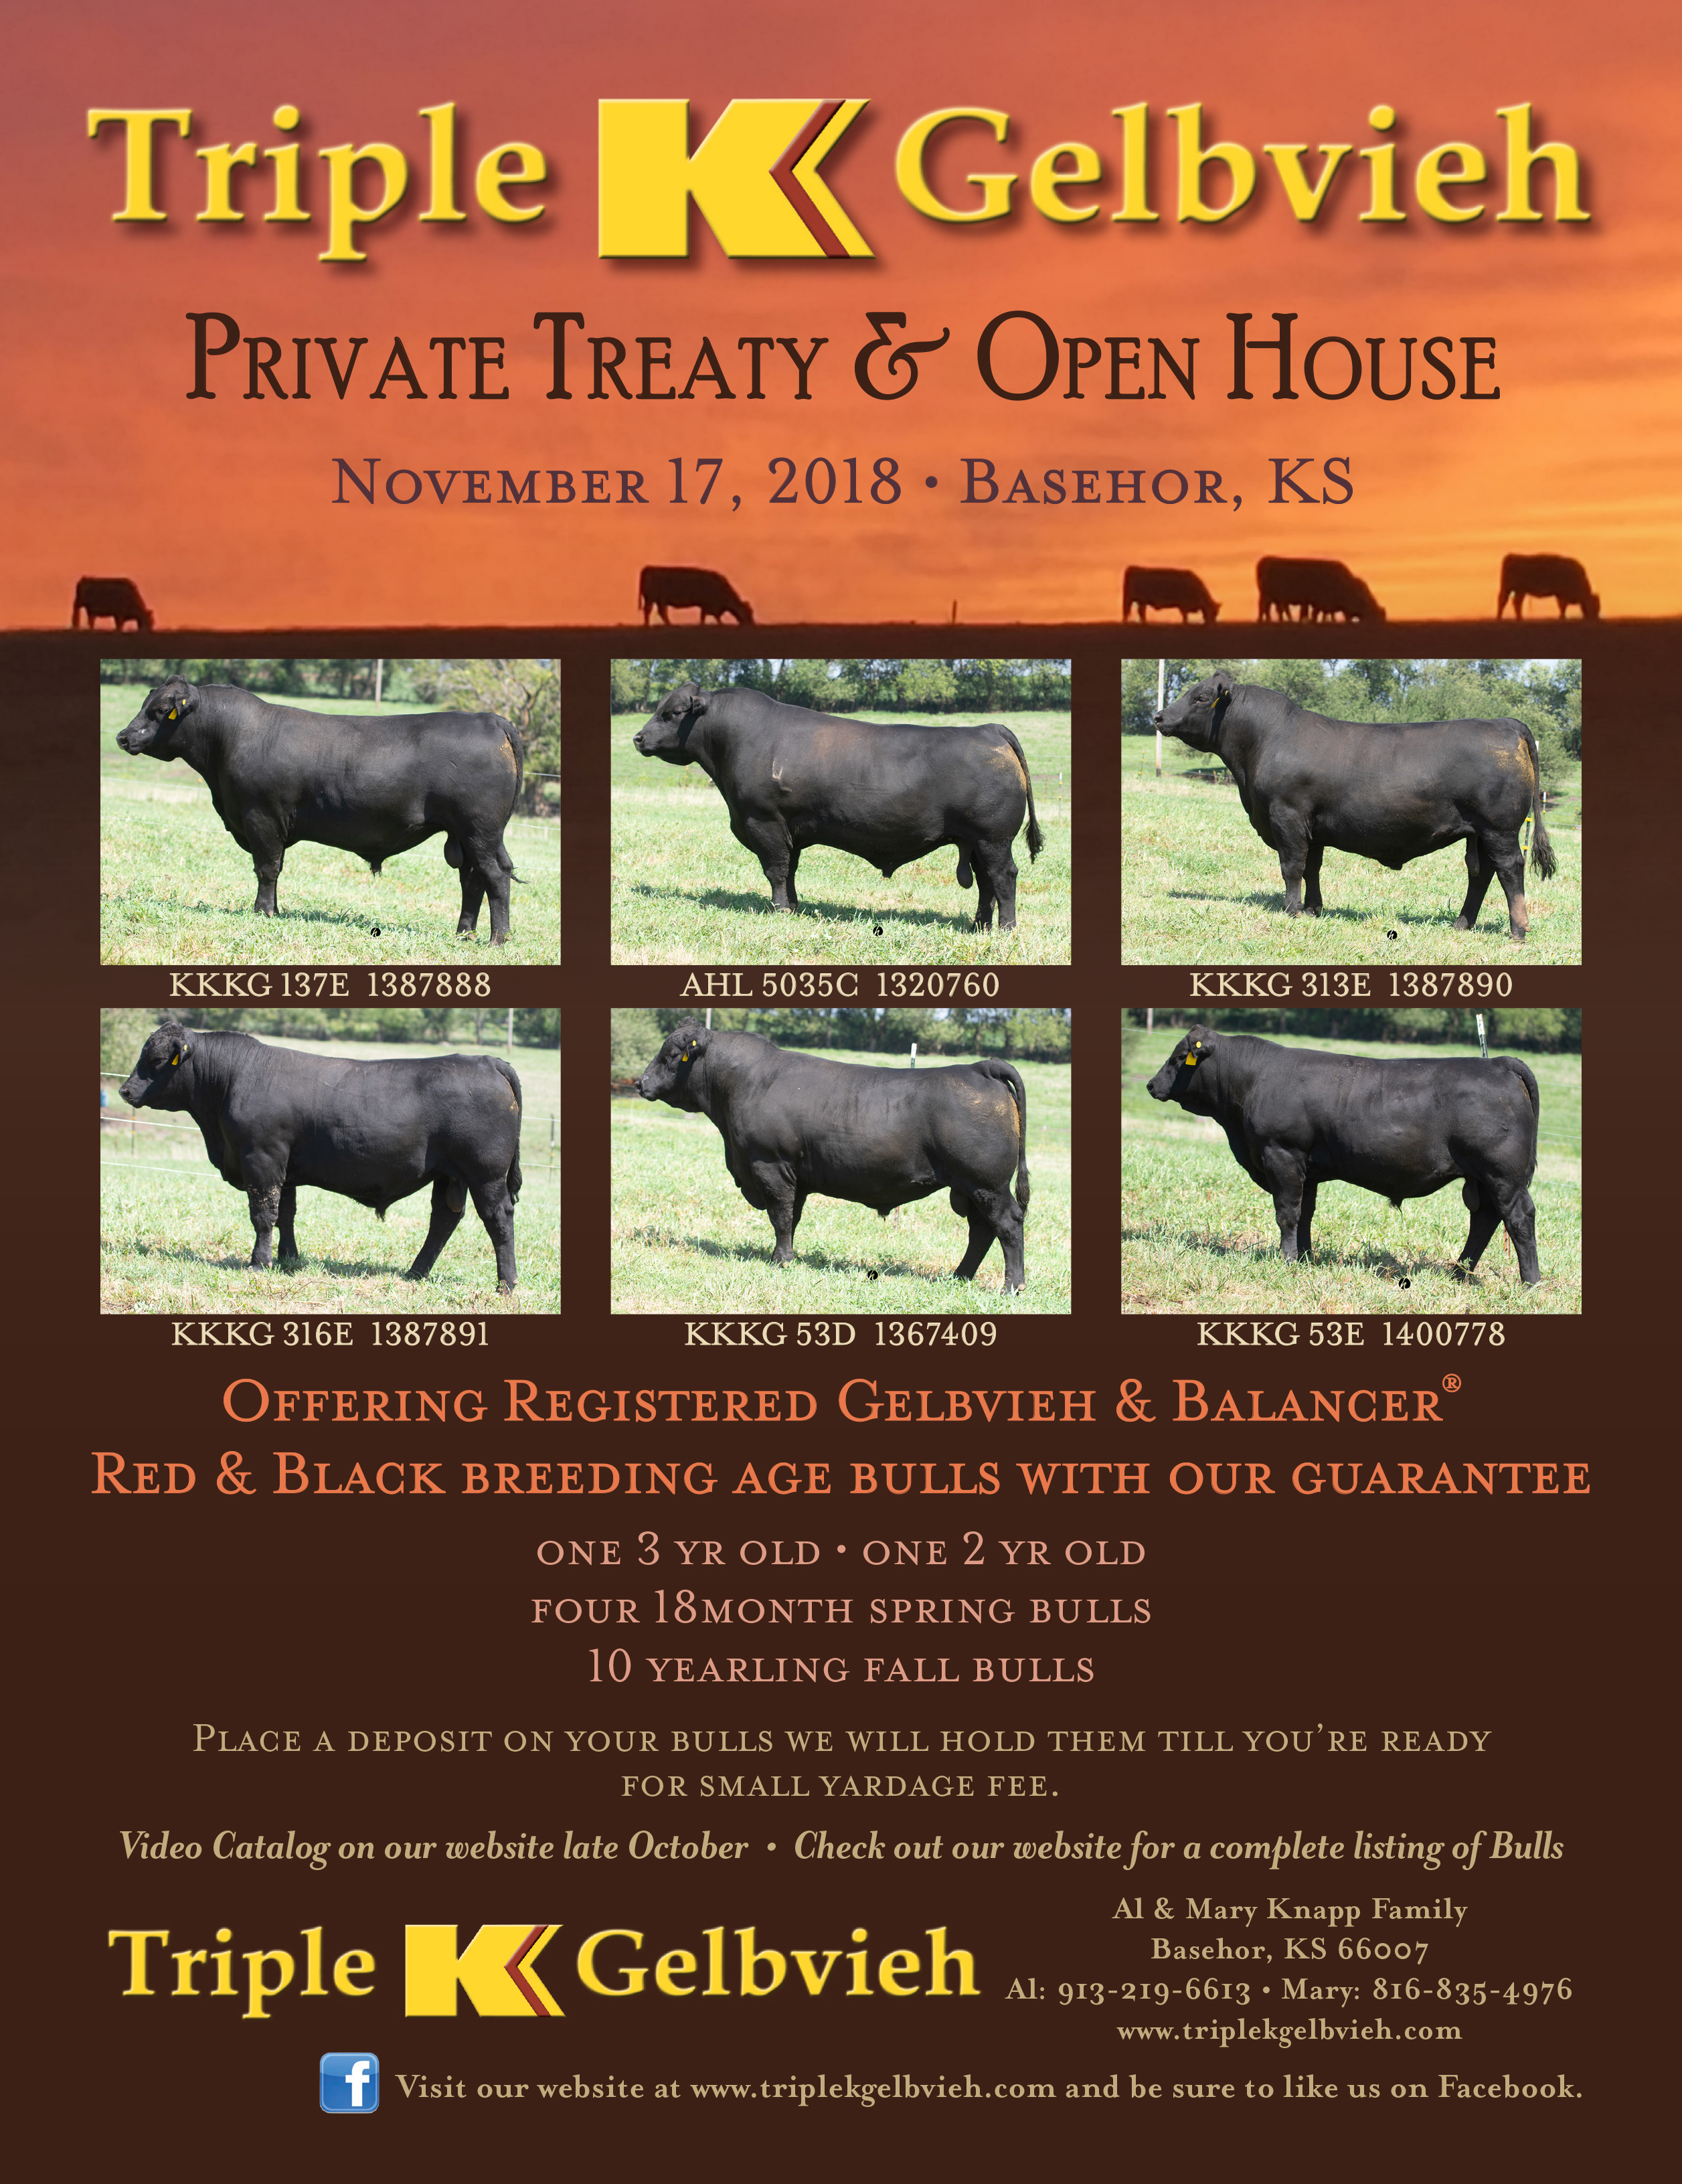 Triple K Private Treaty Sale and Open House on November 17, 2018